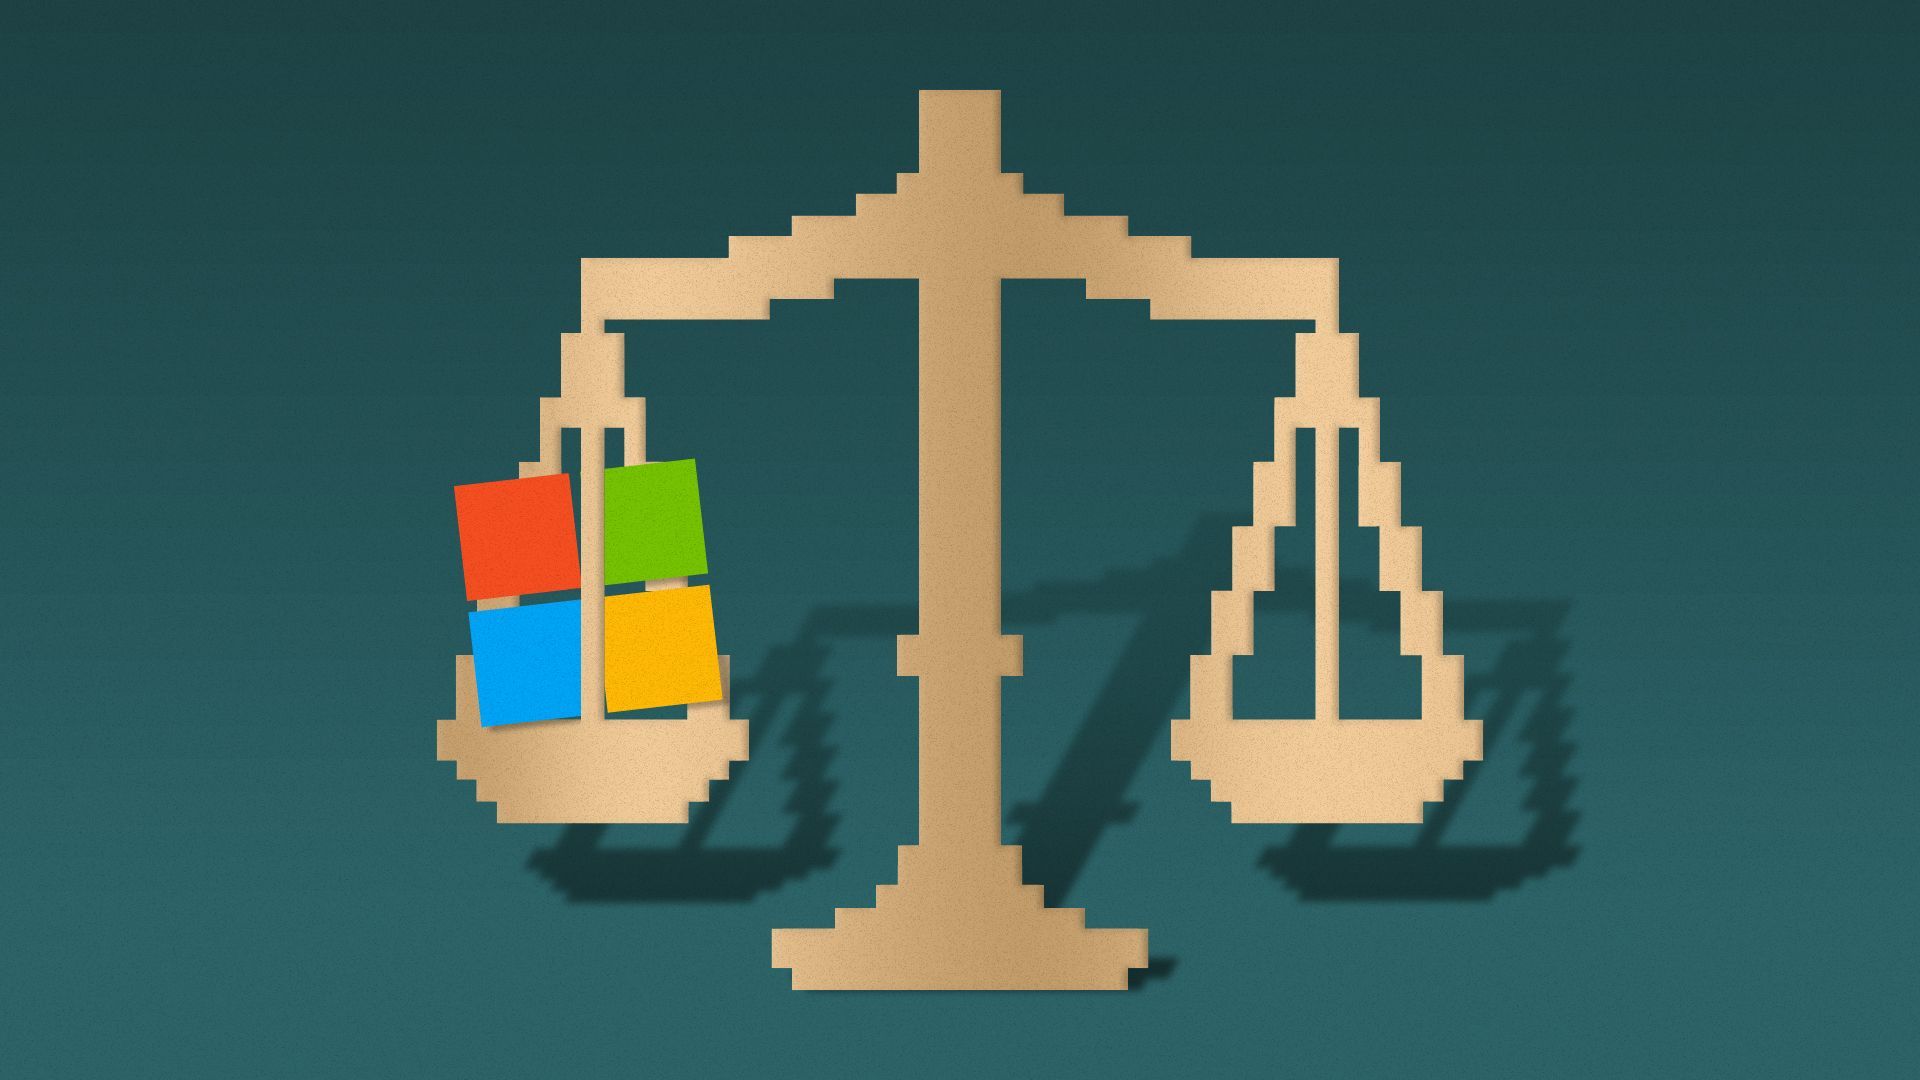 Illustration of pixelated justice scales with Microsoft logo on one side.